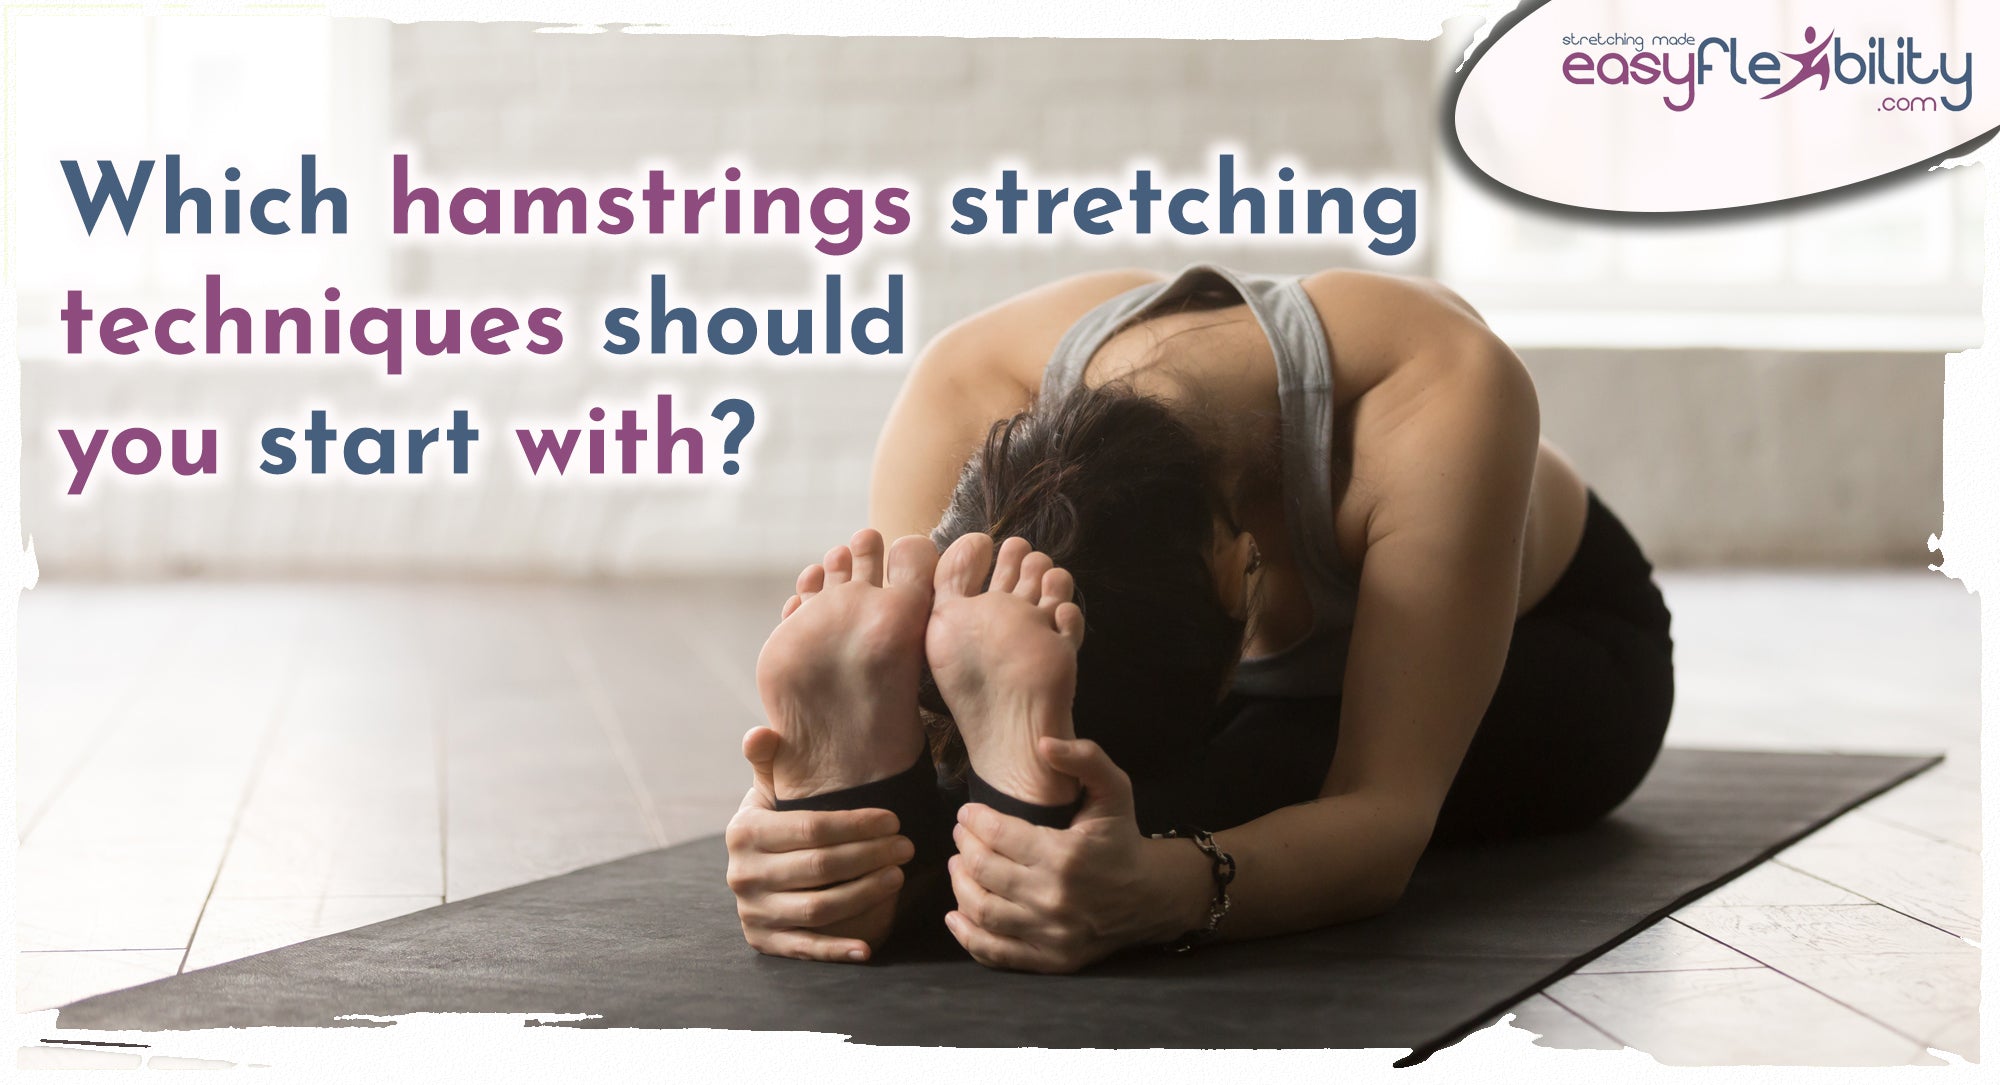 Which hamstrings stretching techniques should you start with?